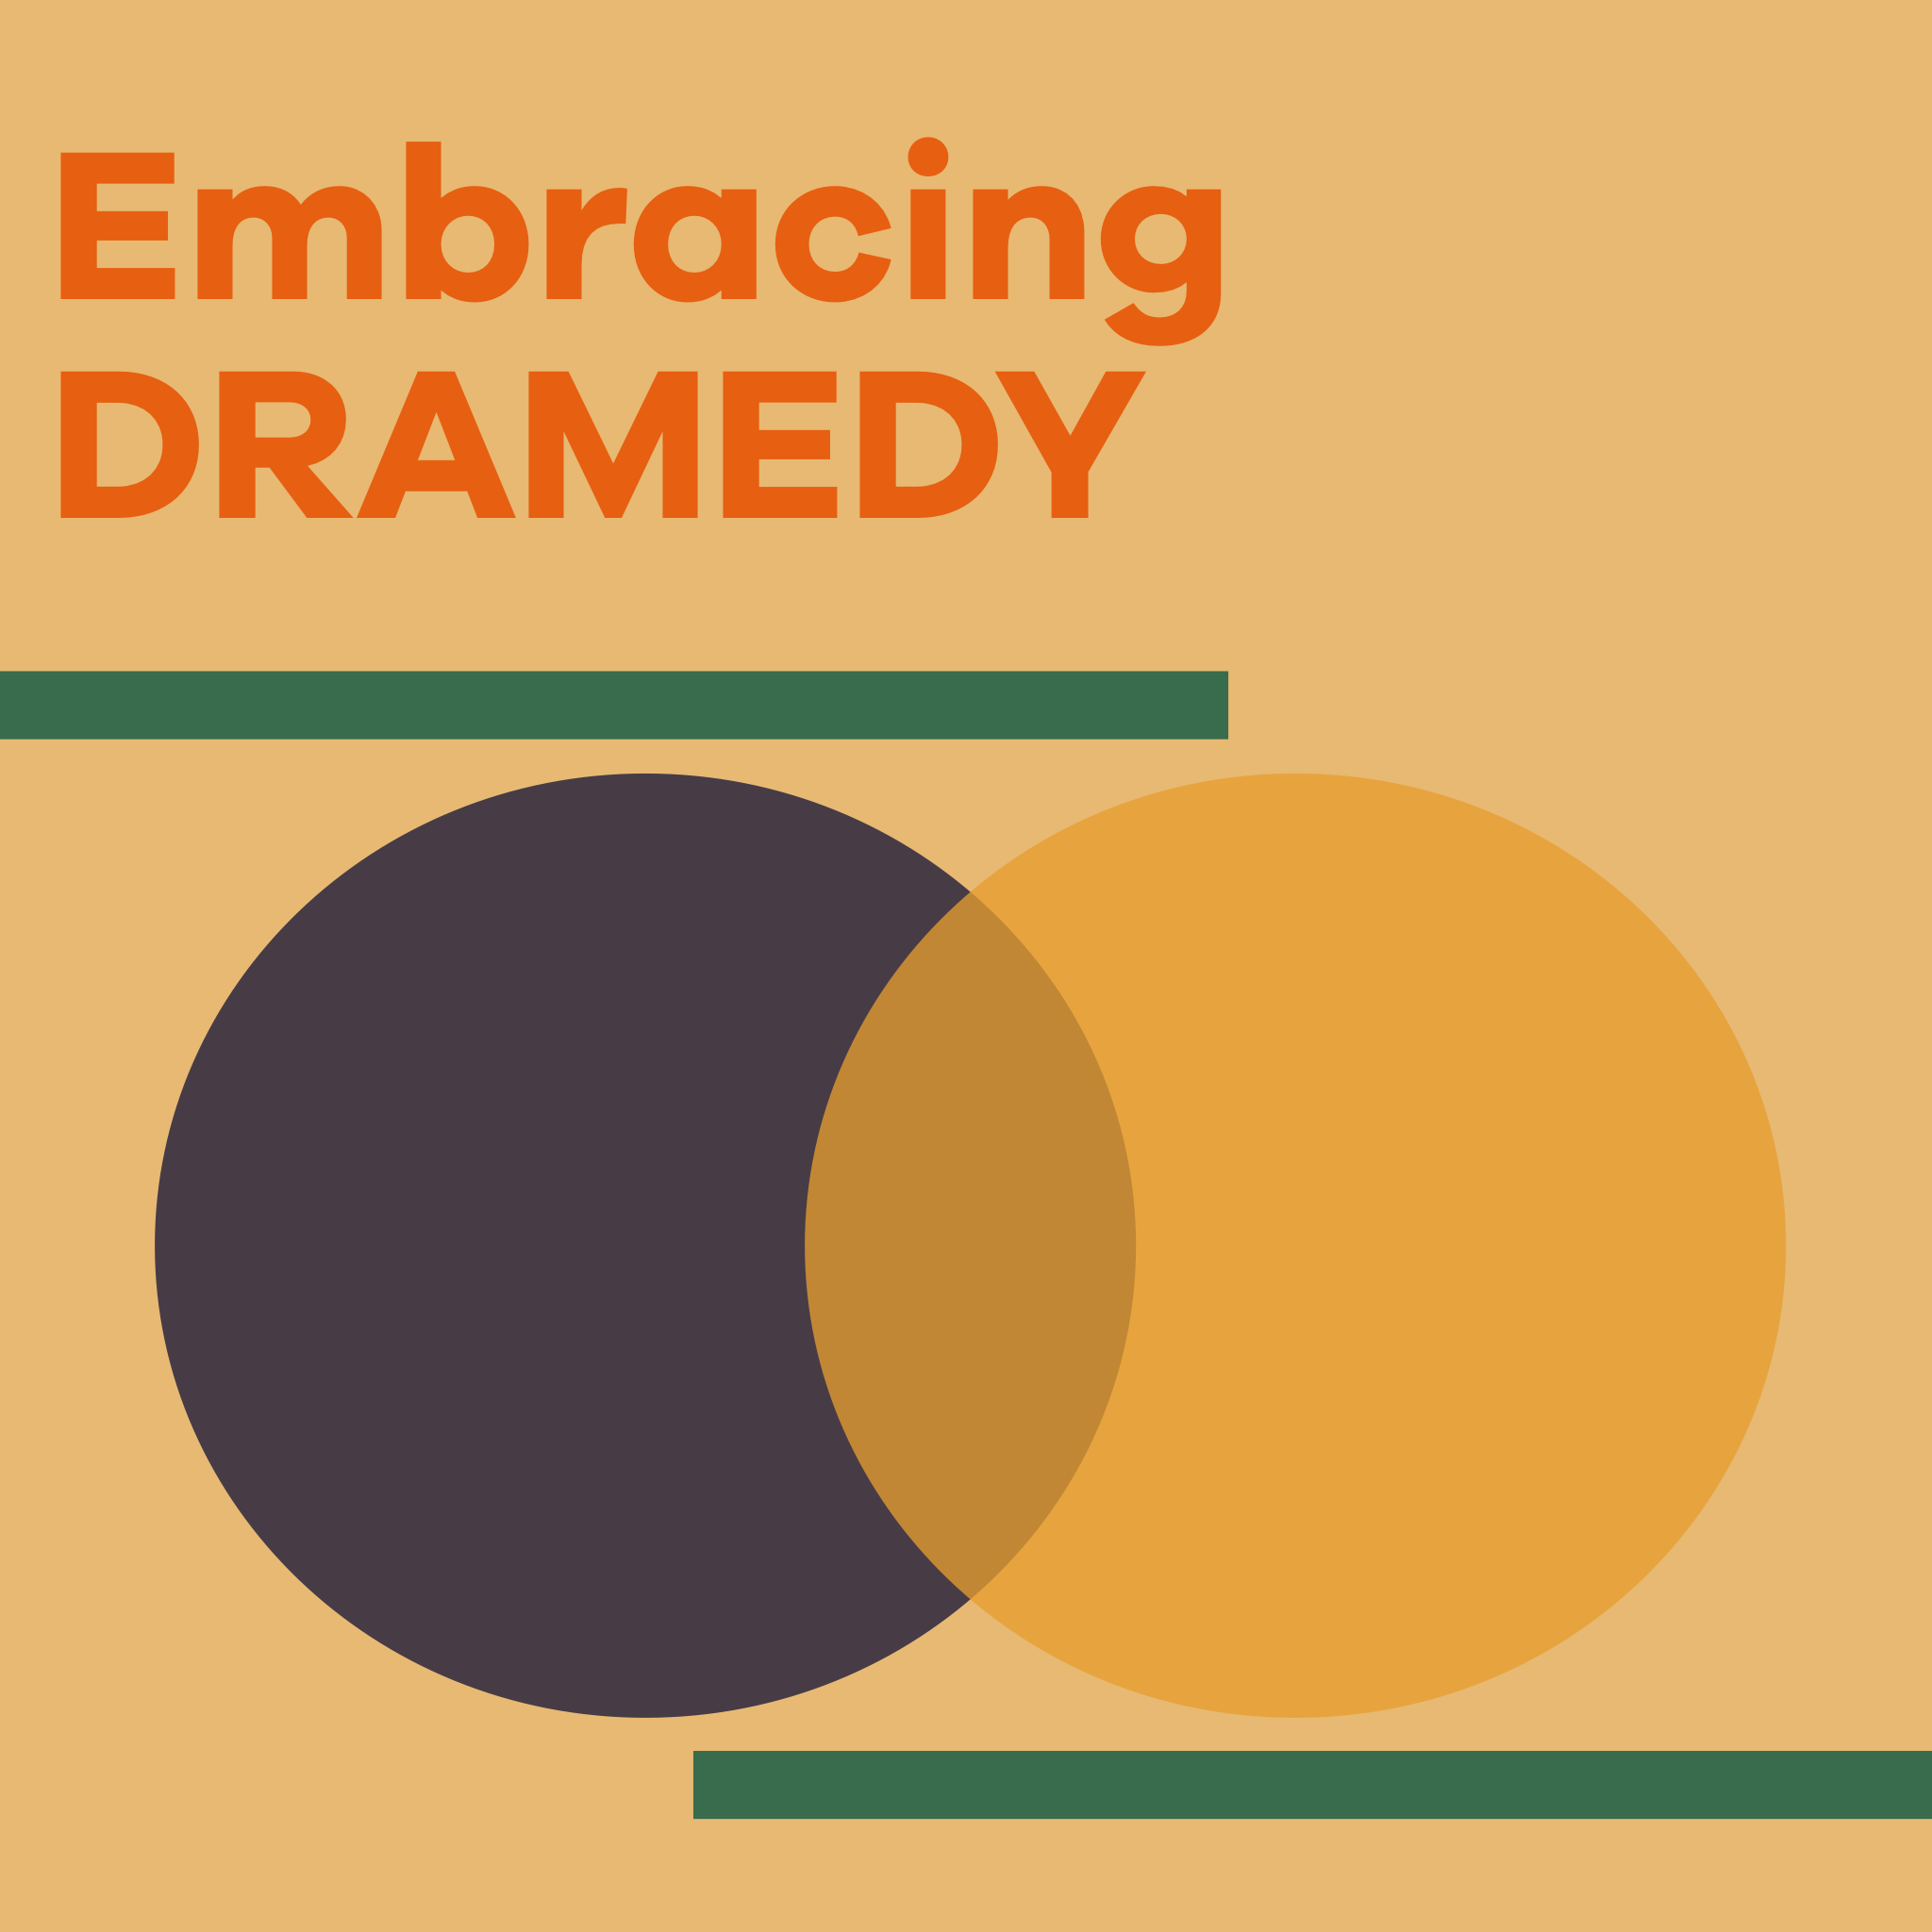 SOLD OUT: WAITLIST AVAILABLE Embracing Dramedy with Charity Miller (ONLINE CLASS)